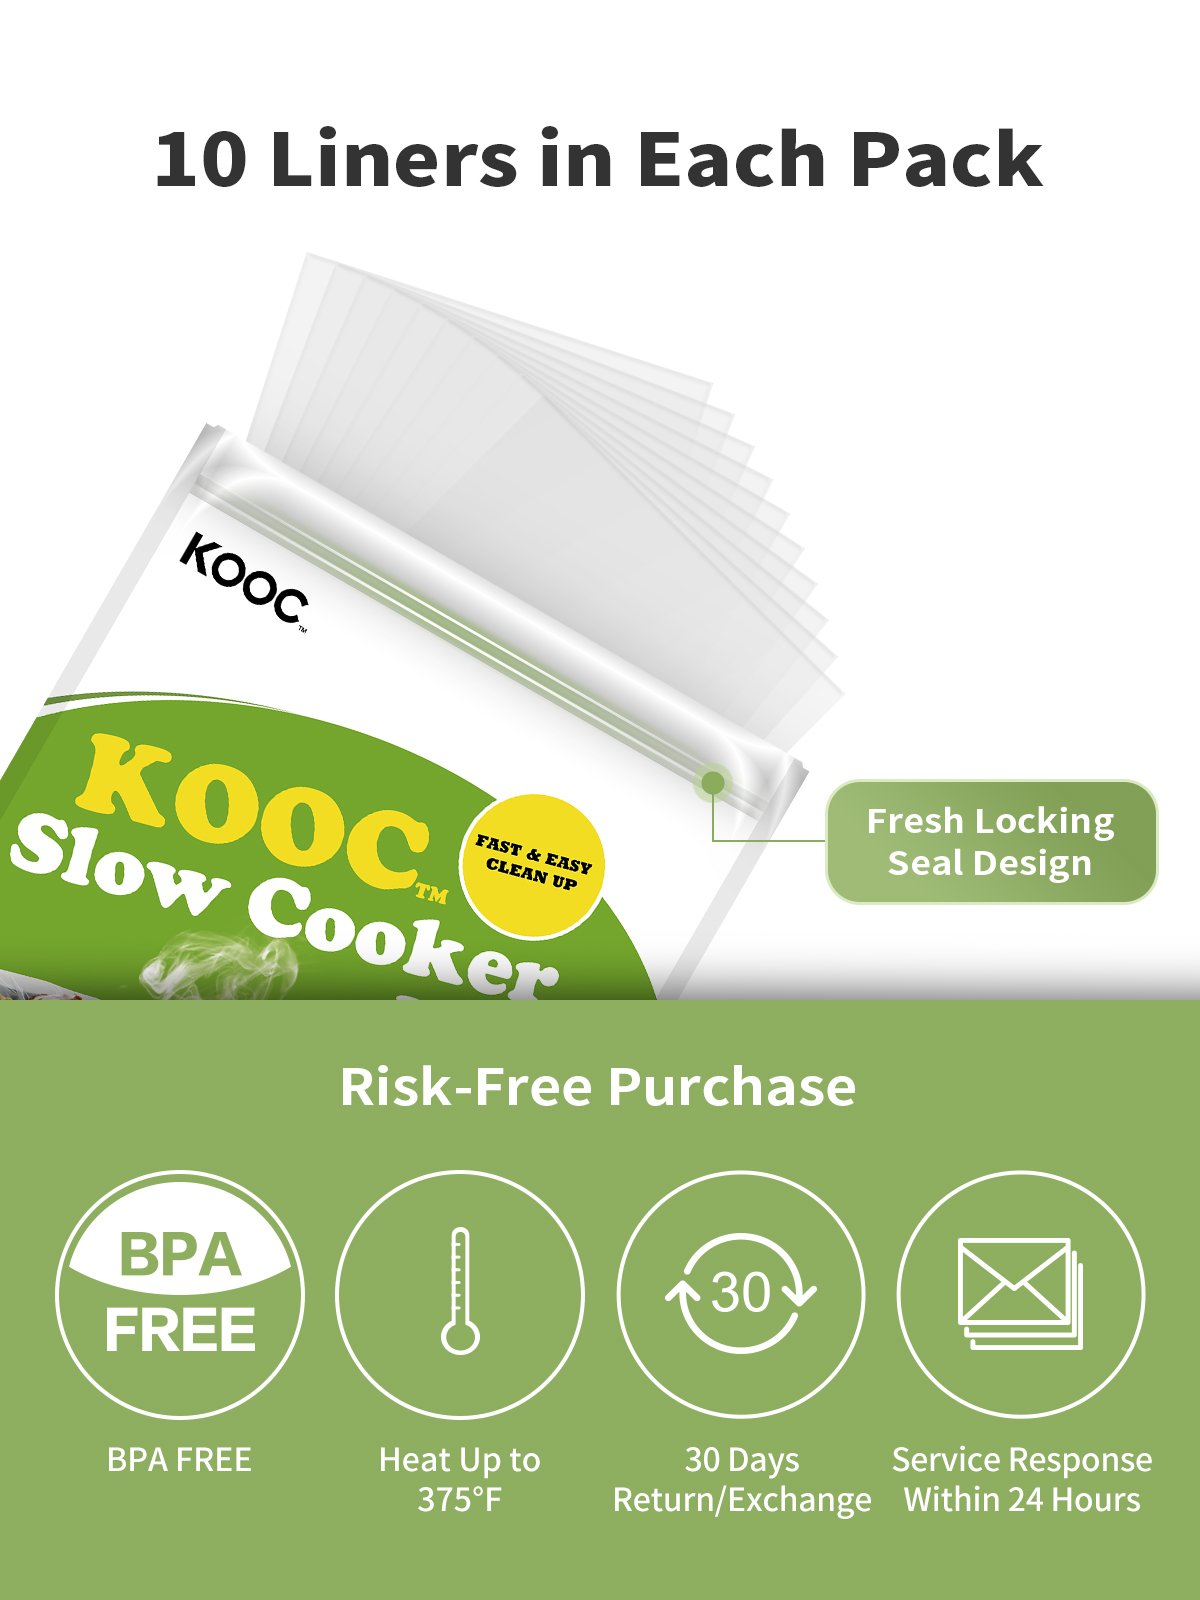 KOOC - Premium Disposable Slow Cooker Liners, L Size Fit 4 to 8.5